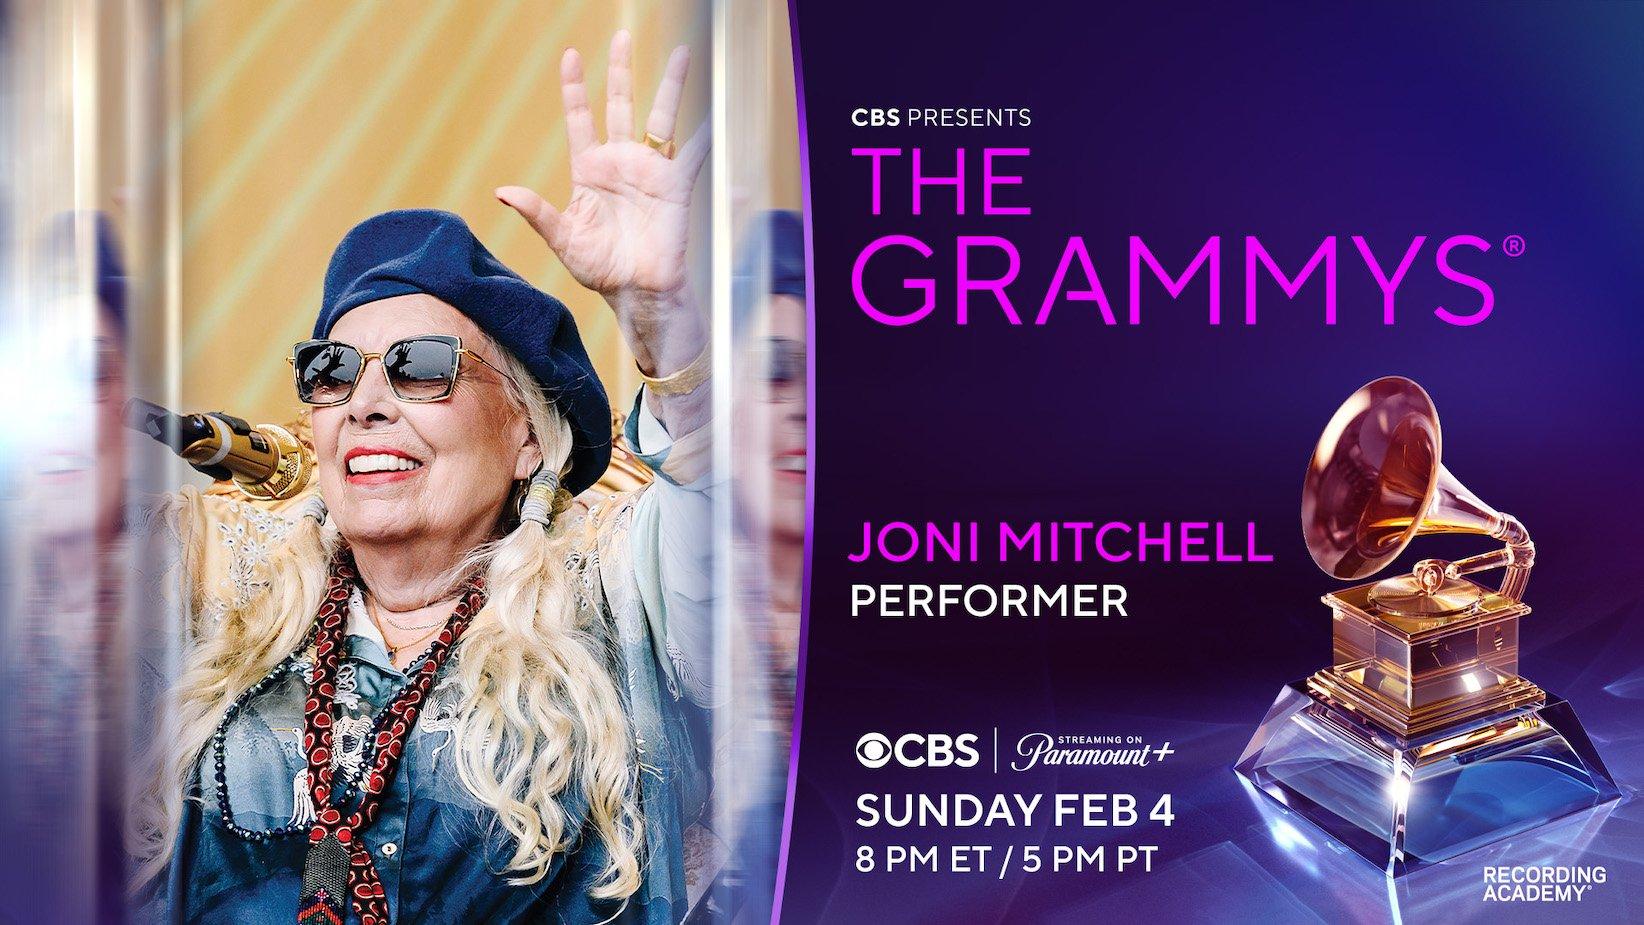 Joni Mitchell will perform at the GRAMMY Awards for the first time ever at the 2024 GRAMMYs on Sunday, Feb. 4.